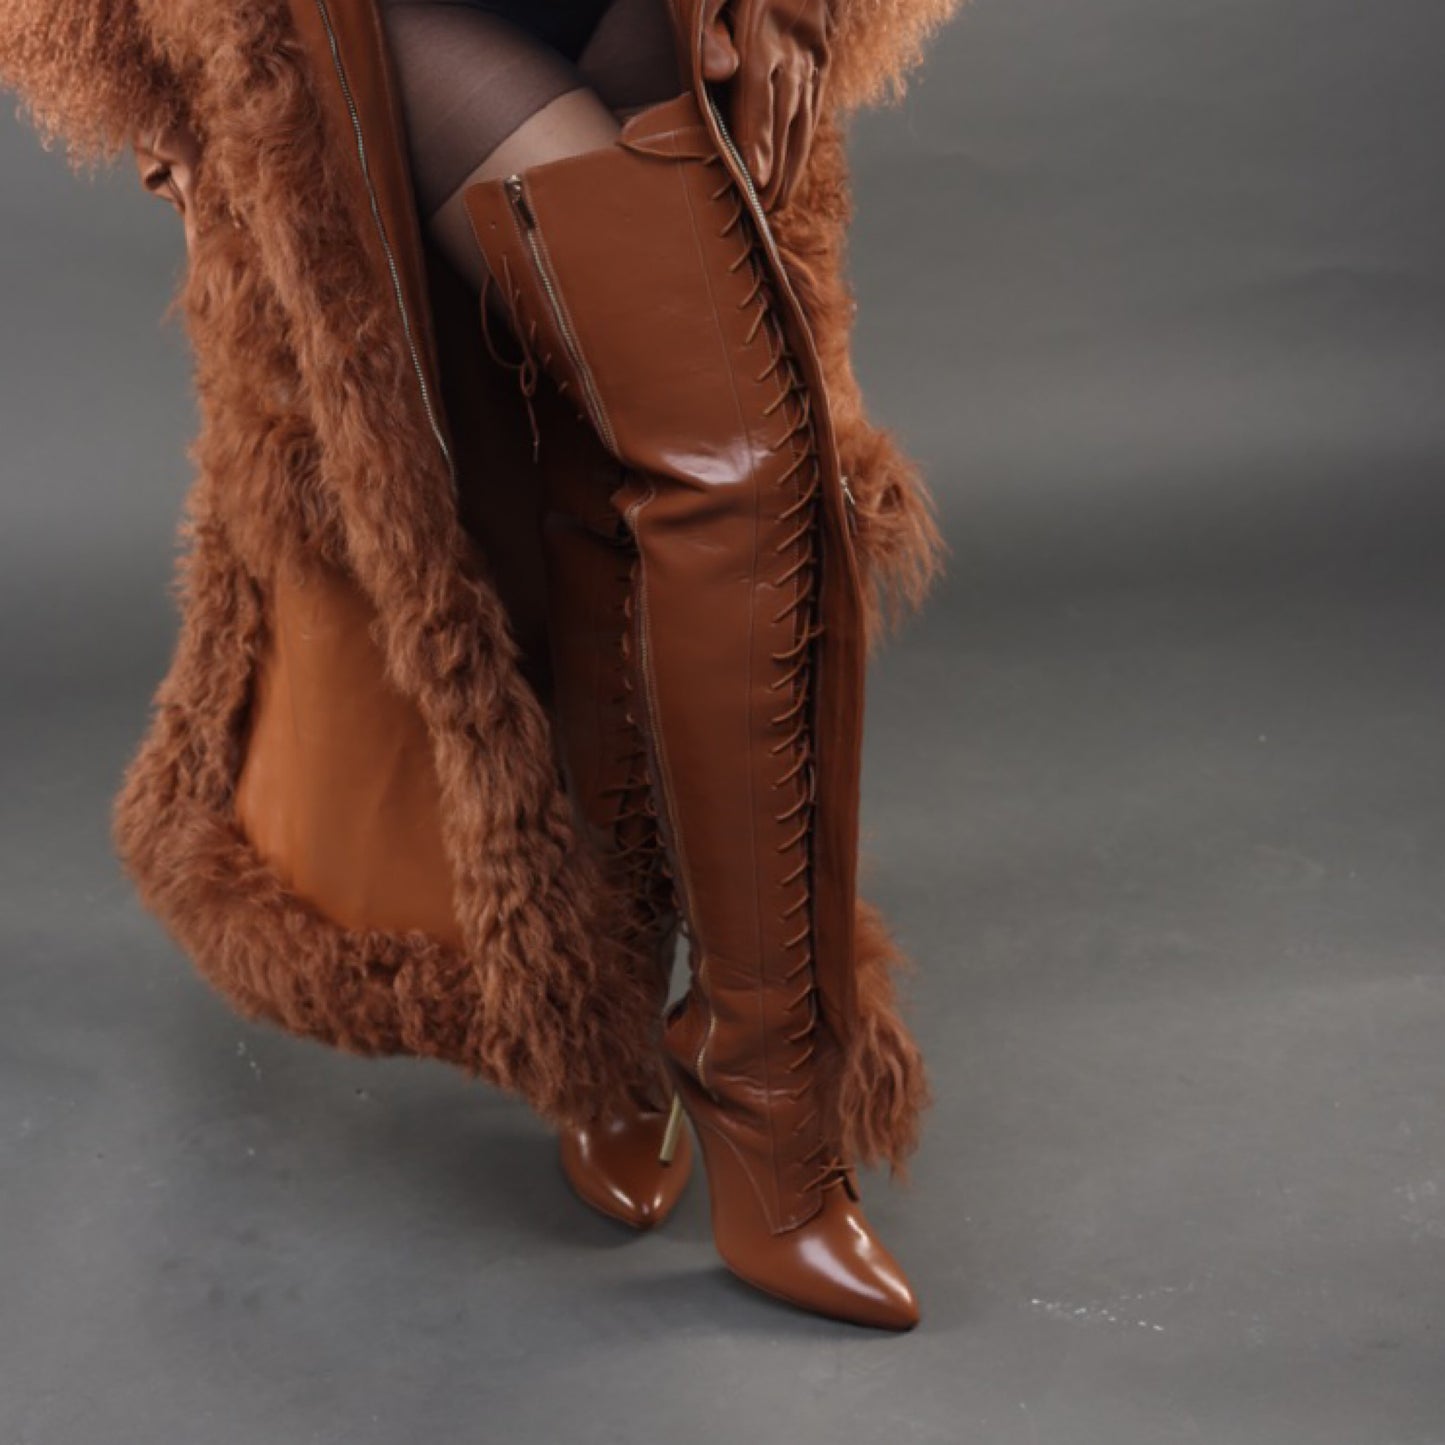 Cacao Peanut Butter Leather x Thigh-High Boot